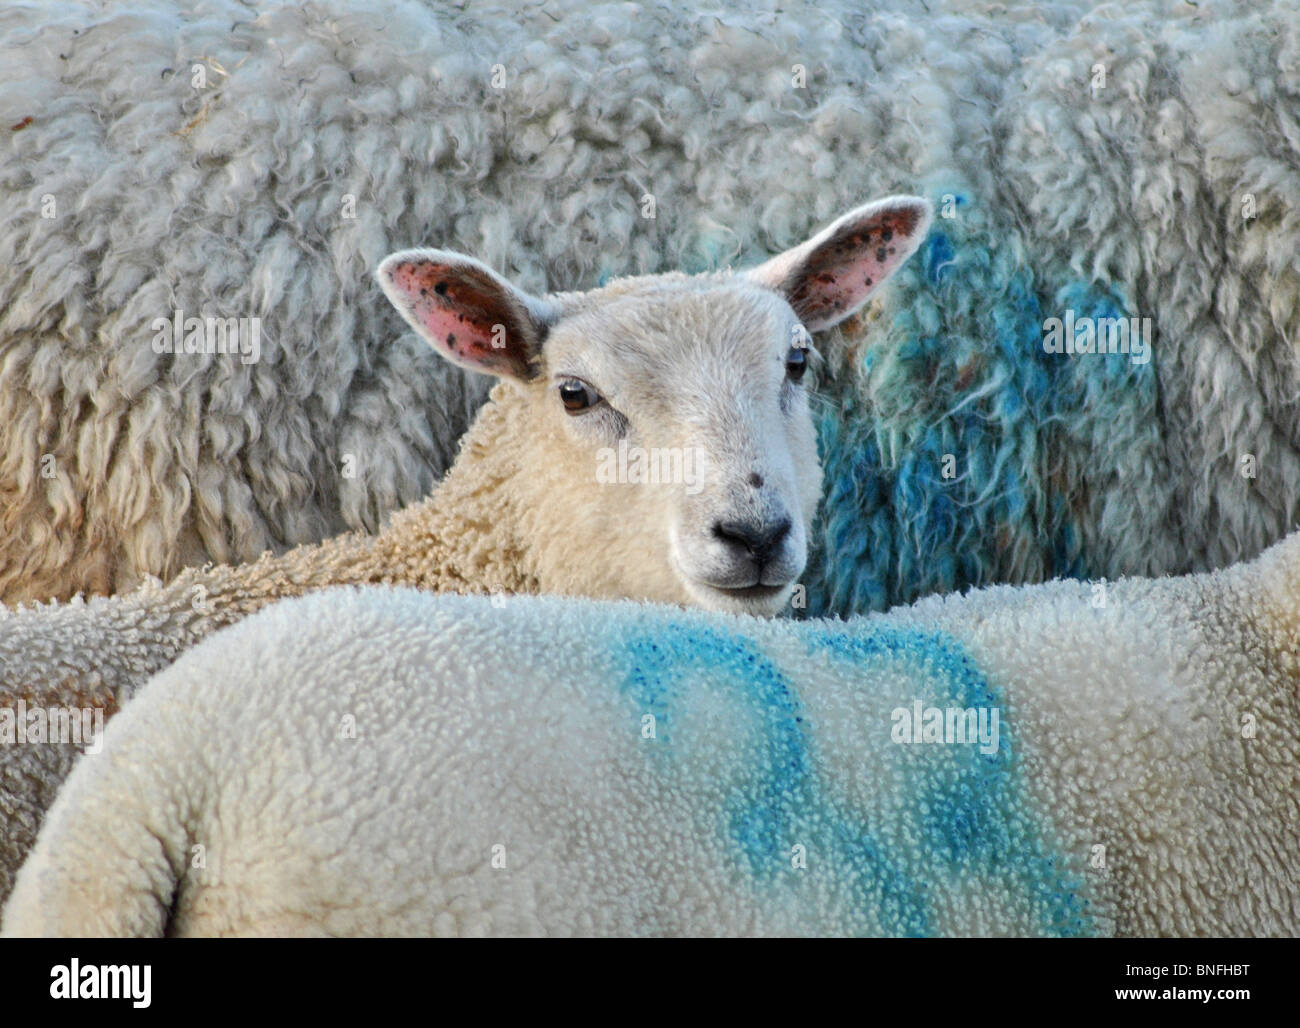 Lamb squashed in a flock of sheep on a farm in Dorset, England Stock Photo